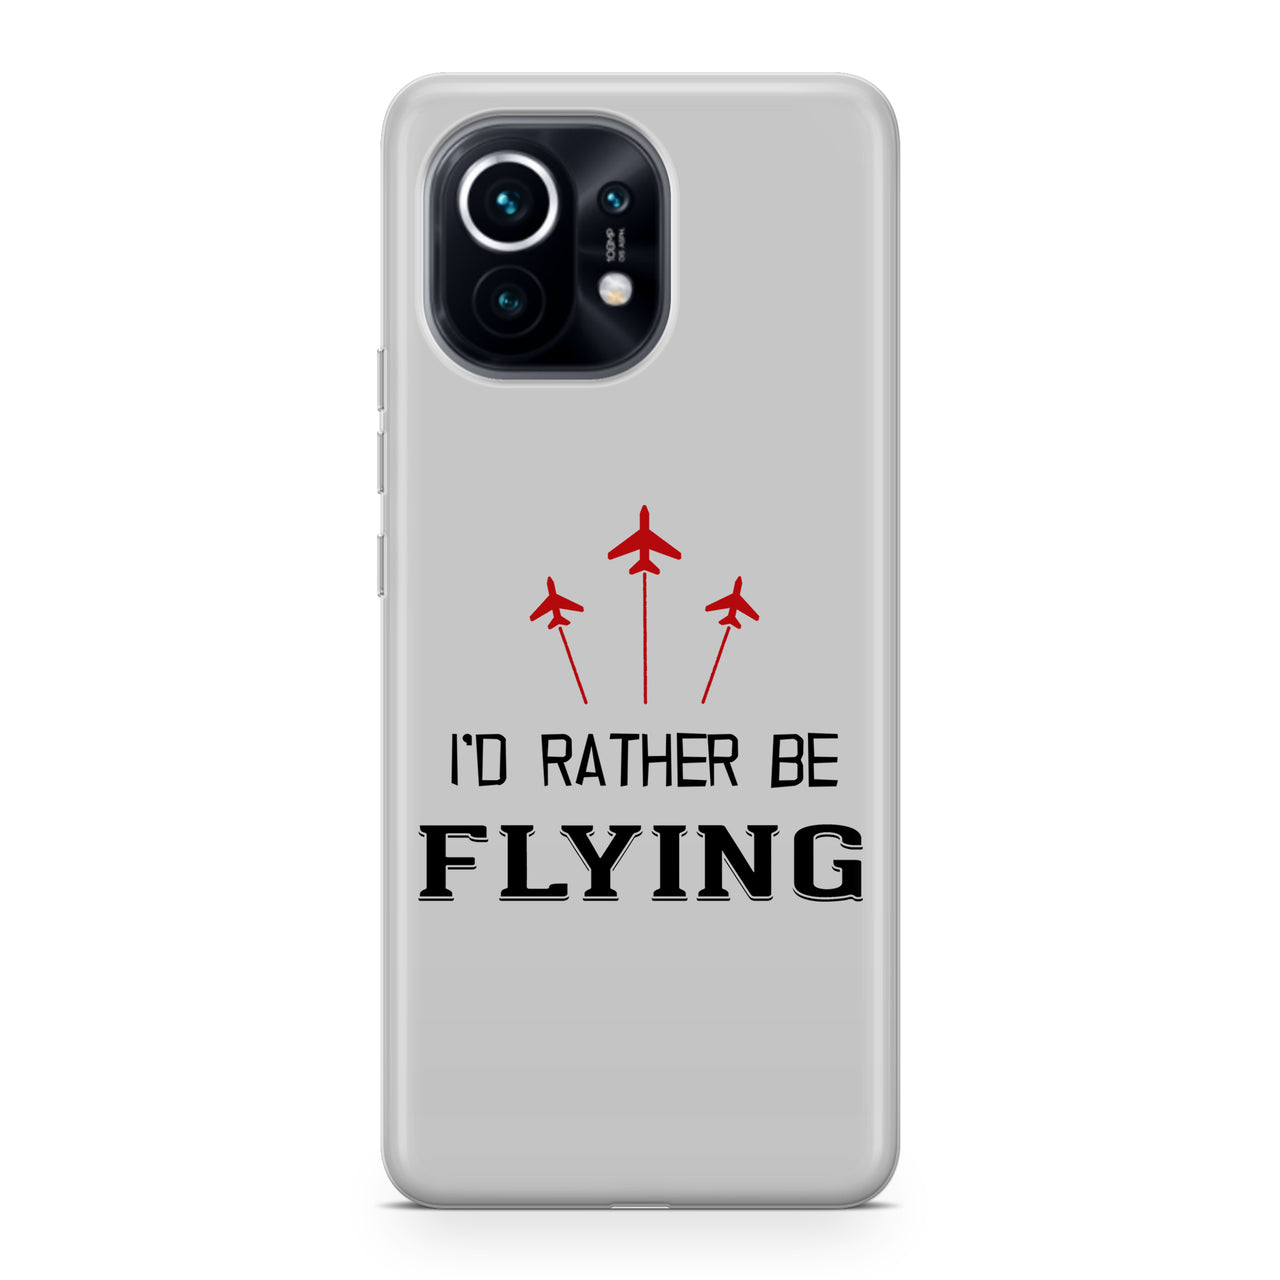 I'D Rather Be Flying Designed Xiaomi Cases